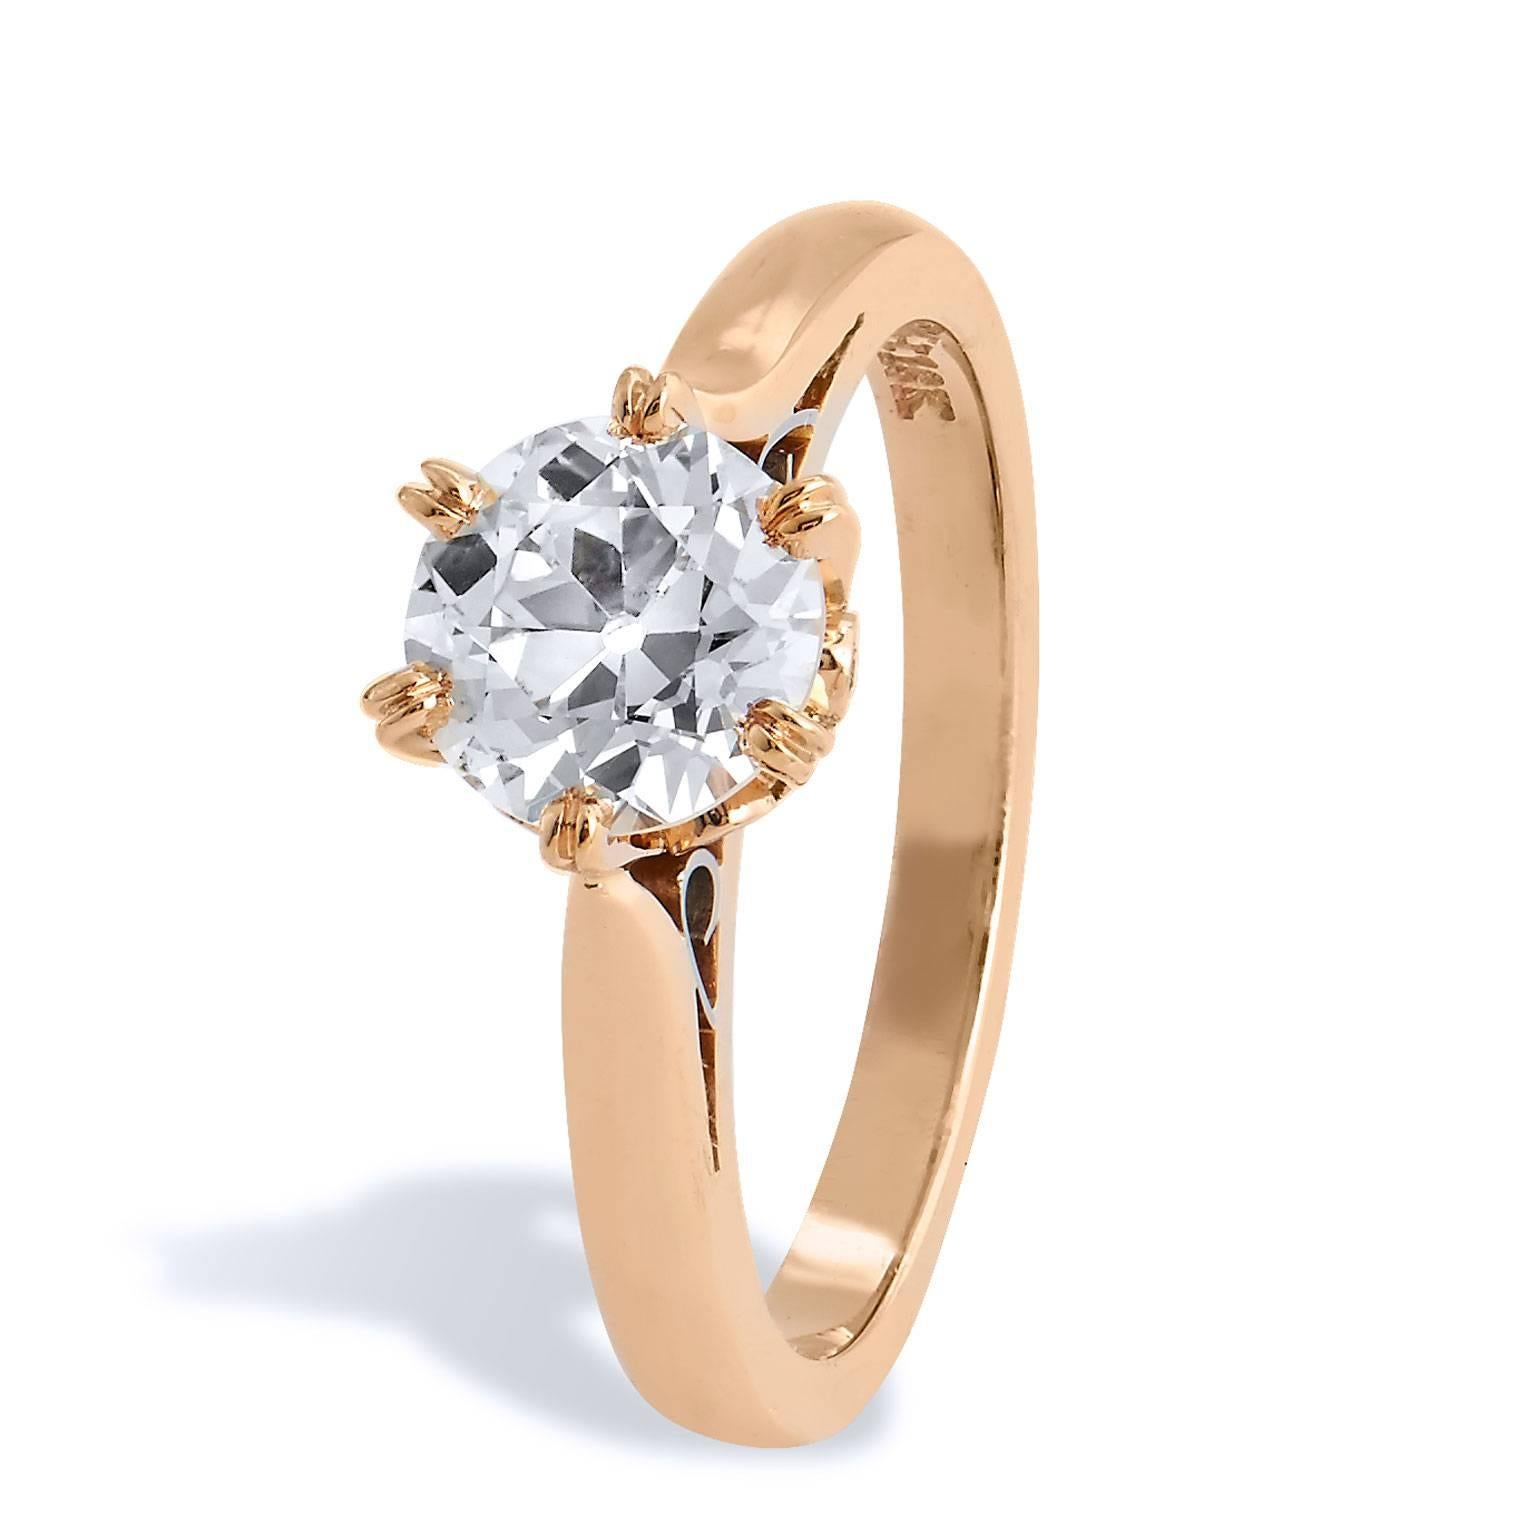 18 karat rose gold makes a statement in this 1.04 carat Old European cut diamond (M/SI2; GIA #6157638684) solitaire engagement ring. To further enhance the charm and dainty quality of this ring are filigree work and six pieces of diamonds with a